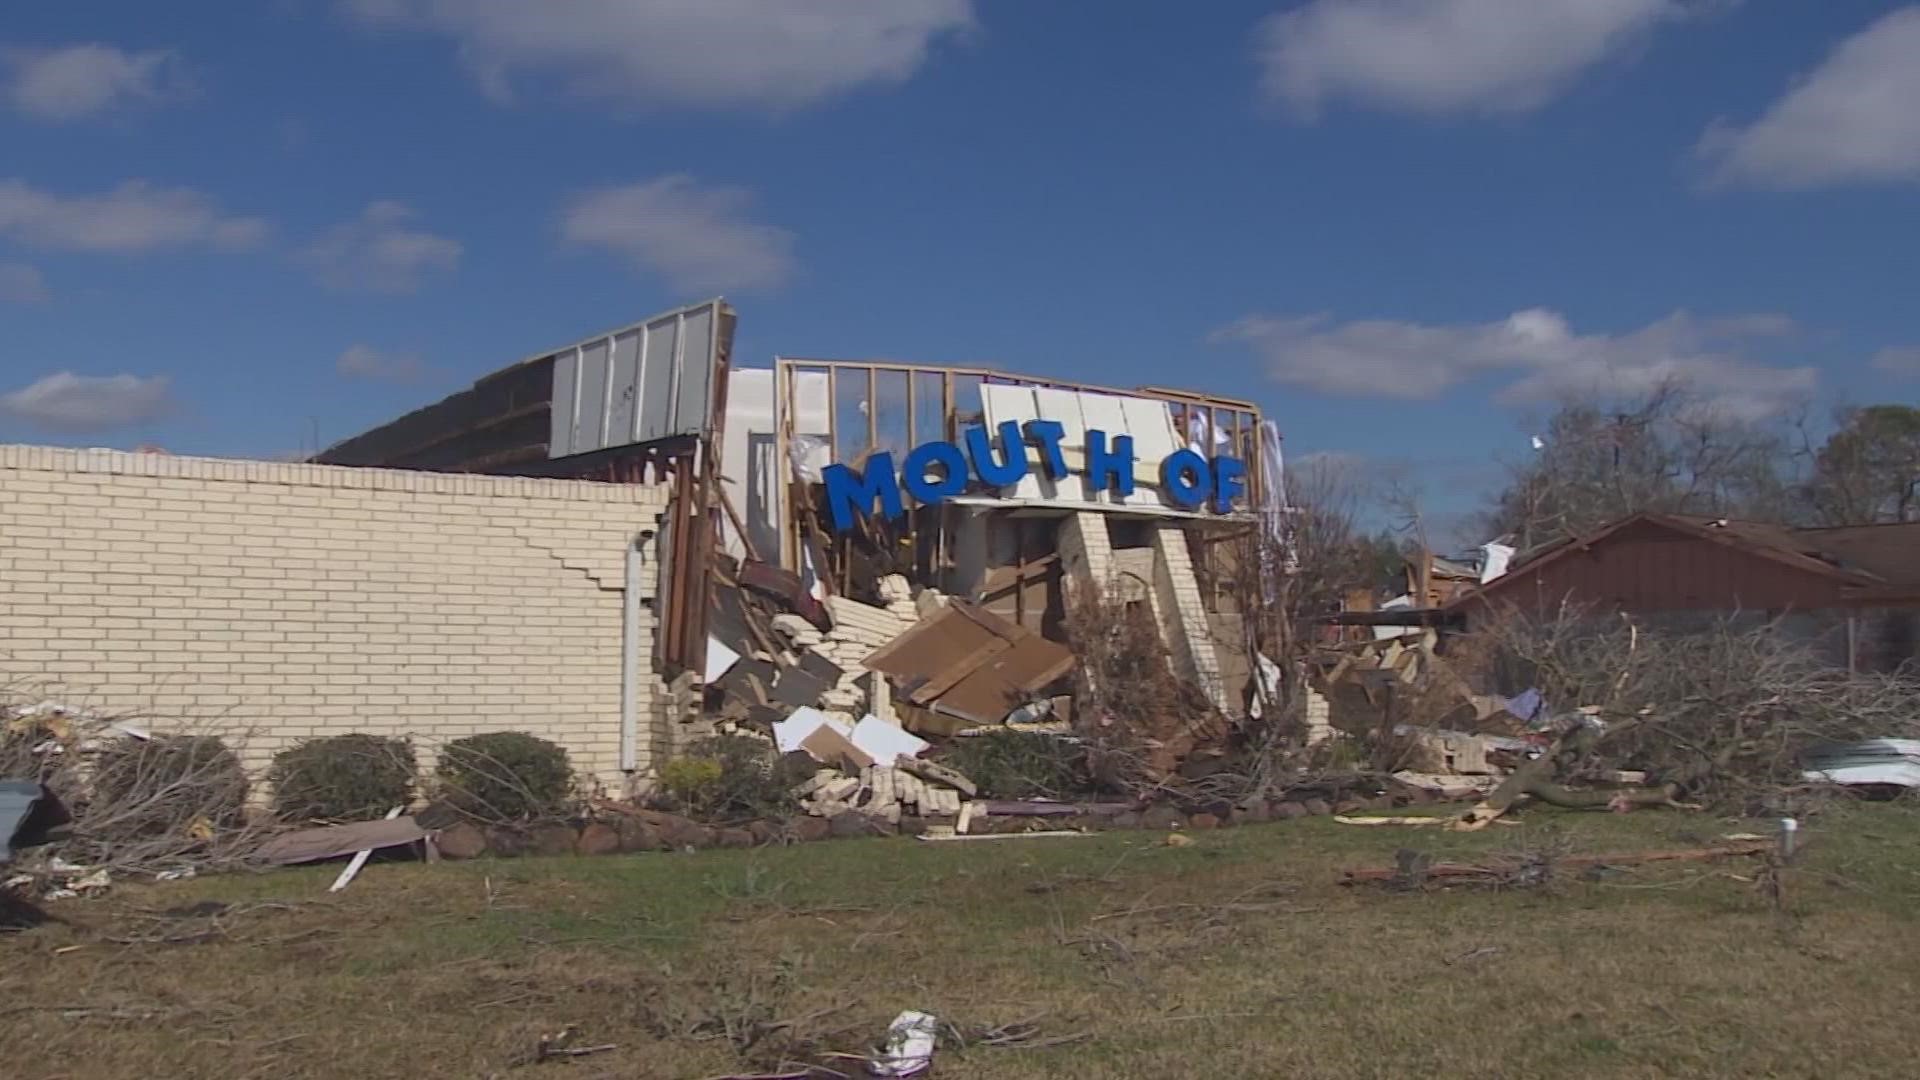 The church pastor said the building was destroyed less than a year after it opened.